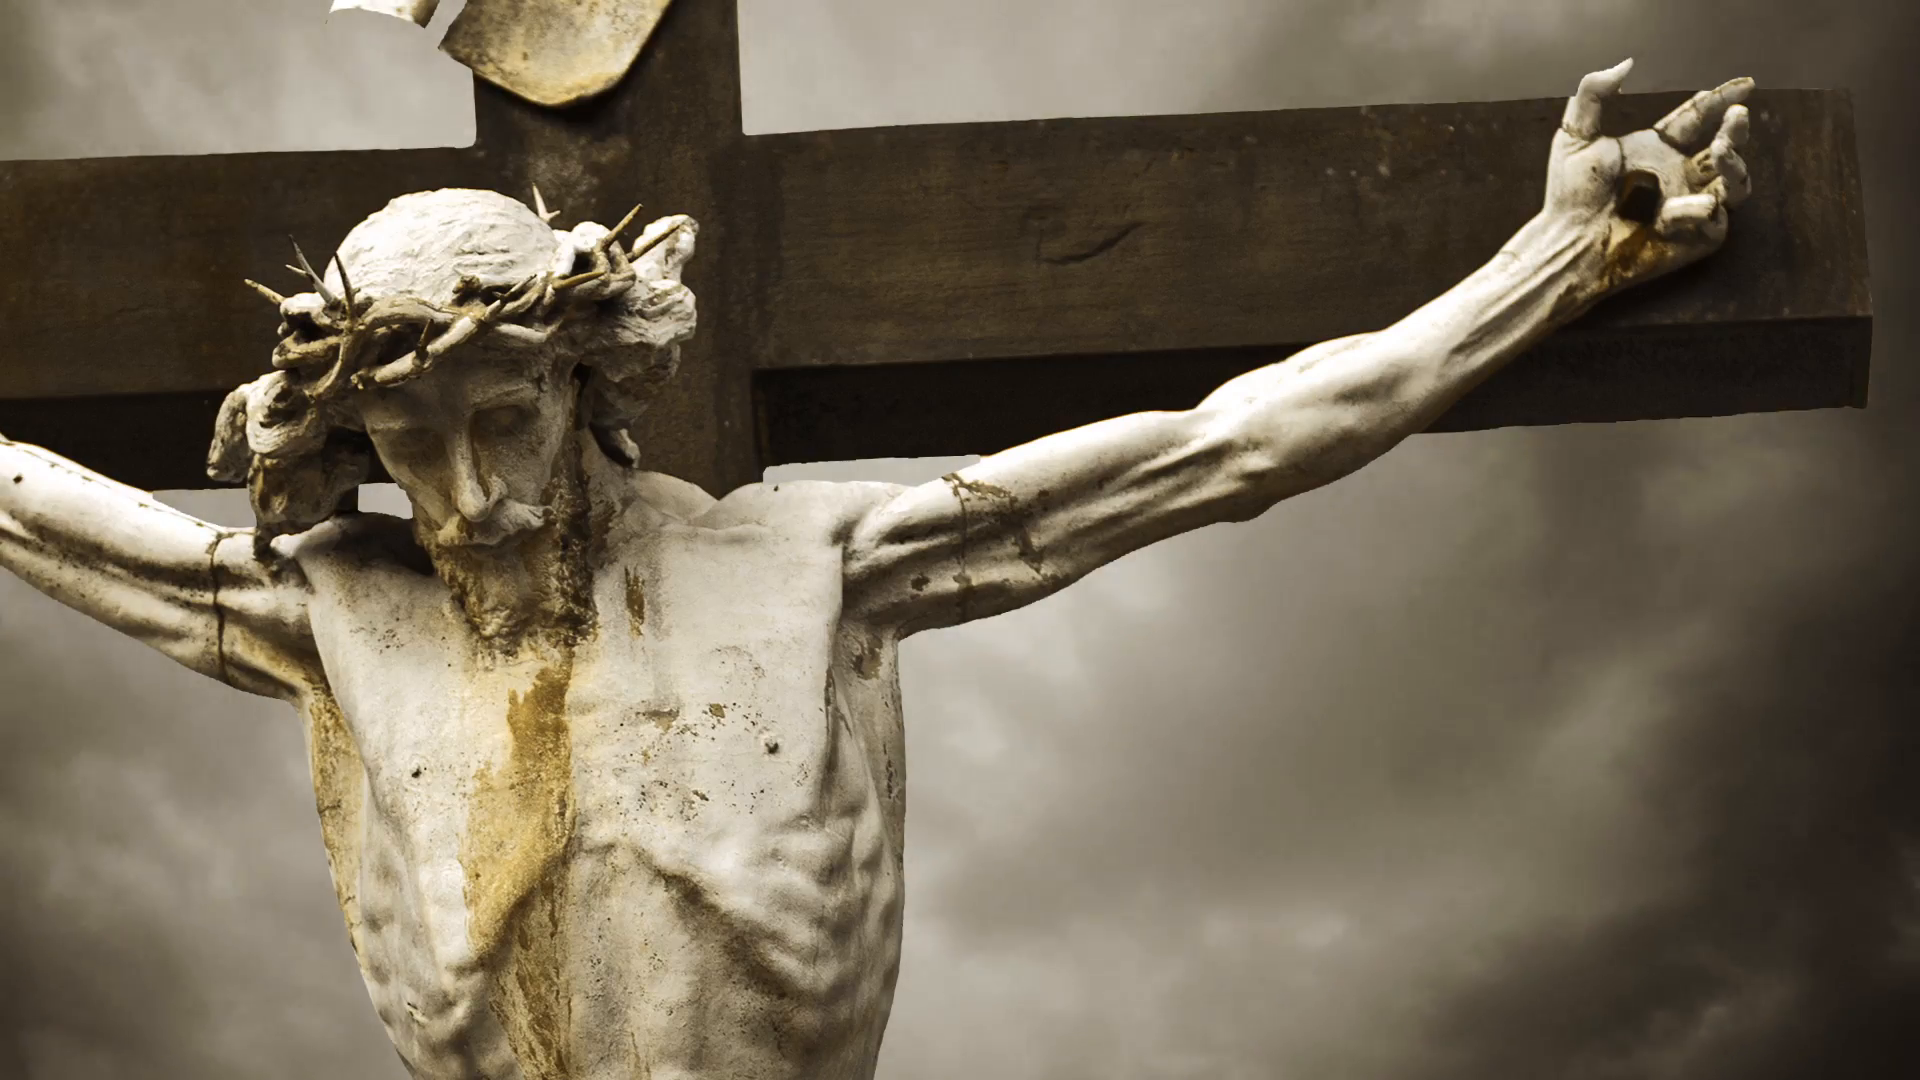 crucifixion-christian-cross-with-jesus-christ-statue-over-stormy-clouds-time-lapse-1920x1080-1080p-hd-format_71gocrfi_f0000.png